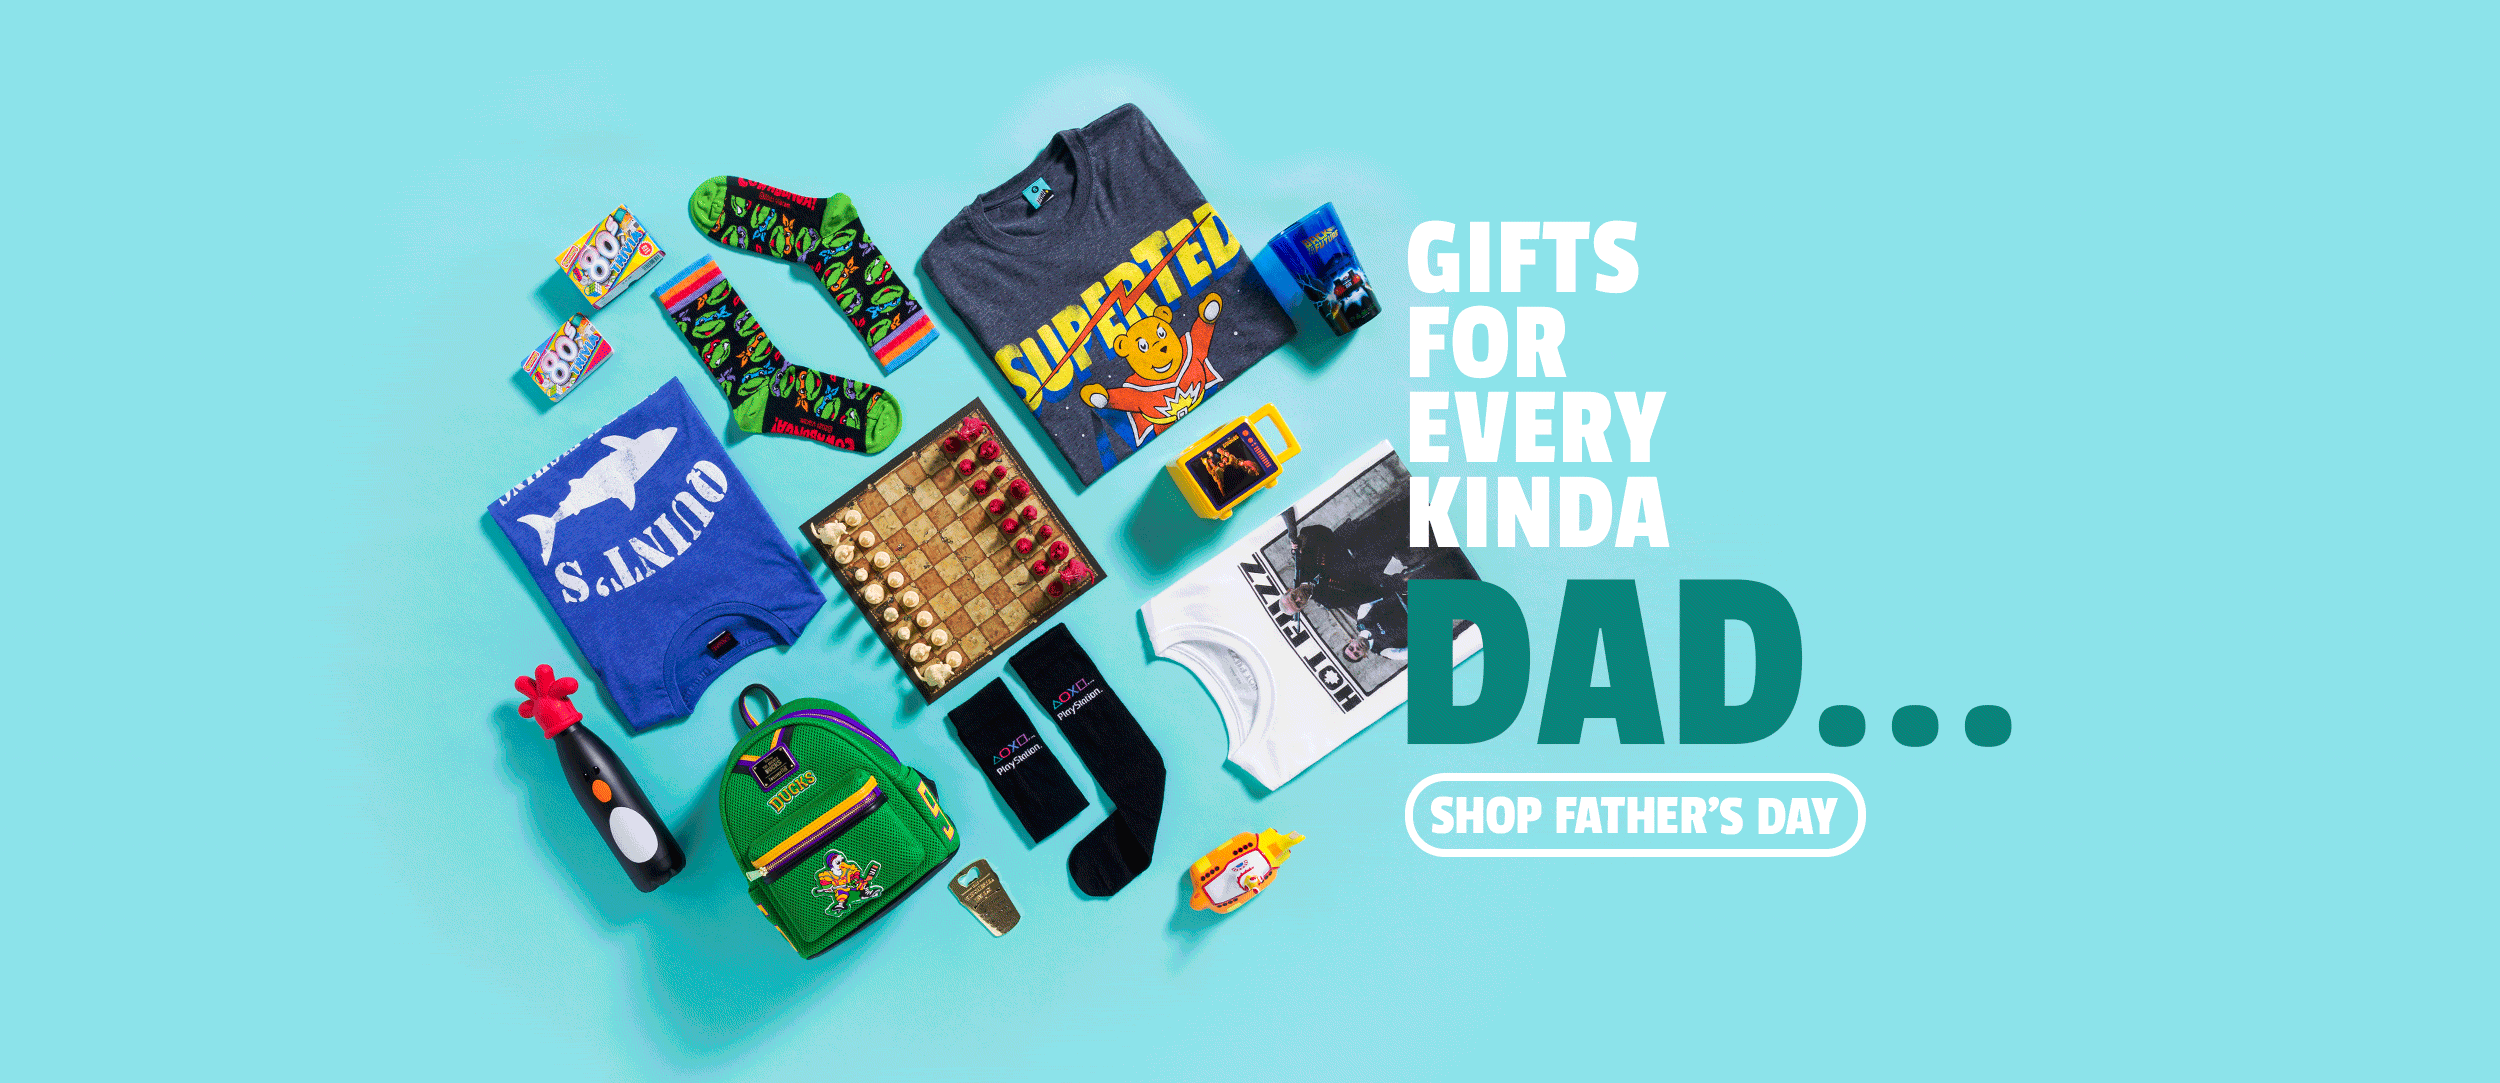 GIFTS FOR EVERY KINDA DAD - Shop Father's Day